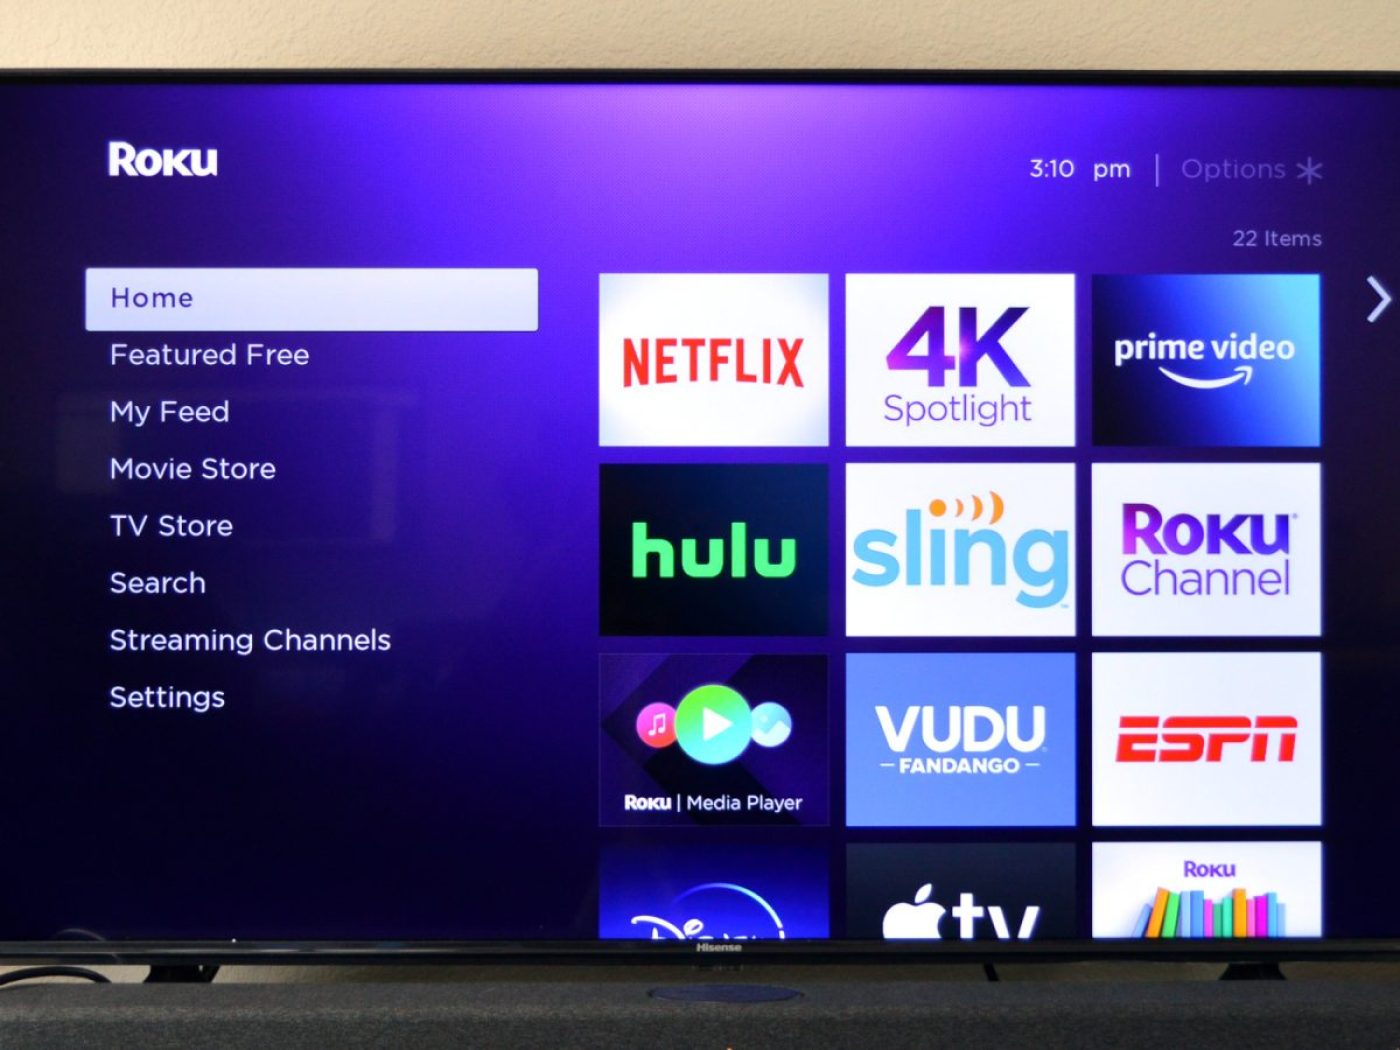 If you have a Roku, you just got these 25 new channels for free